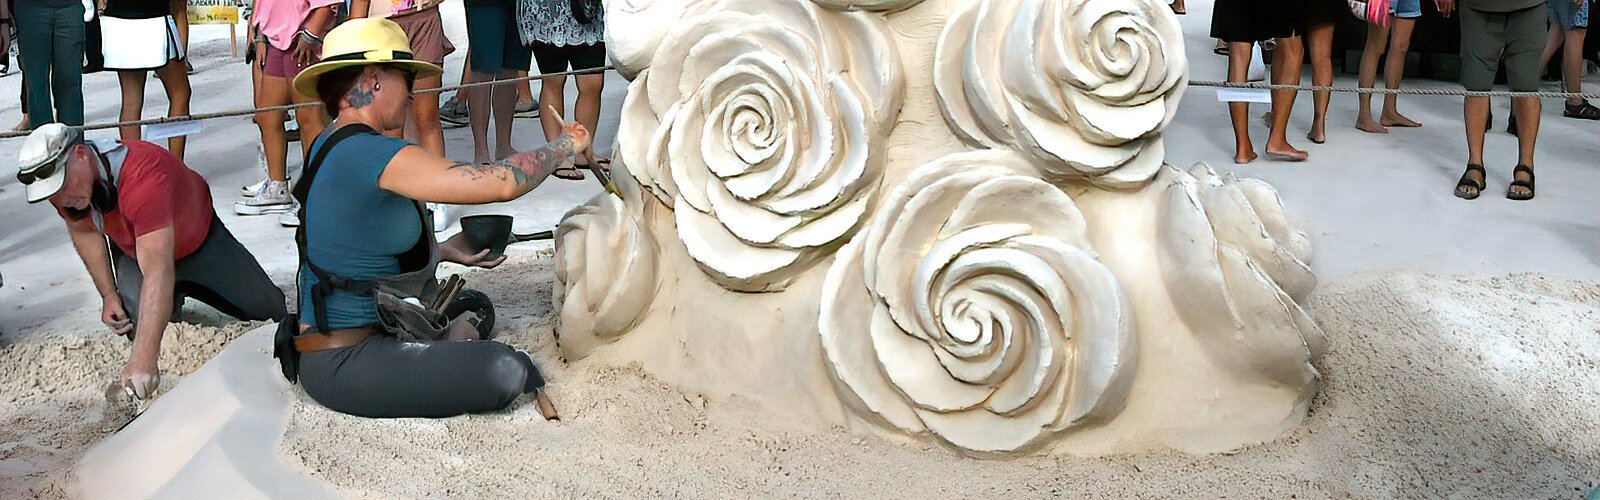 Mélineige Beauregard, of Montreal, Canada, puts the finishing touches to her sand creation “Take Time to Smell the Roses” at the Sanding Ovations sand sculpting competition event.